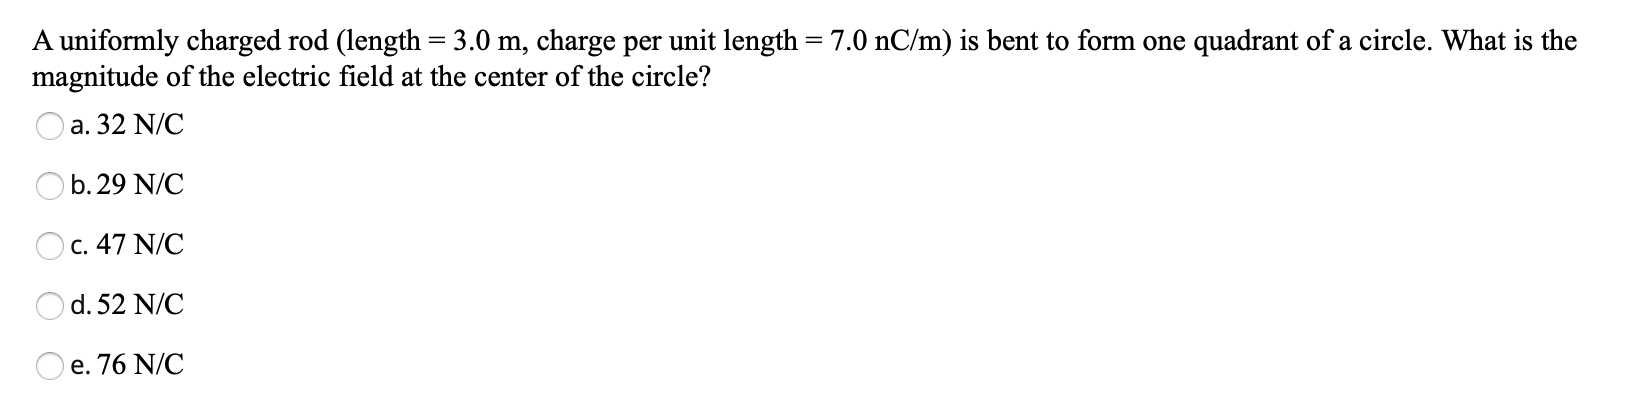 magnitude of the electric field at the center of the circle?
